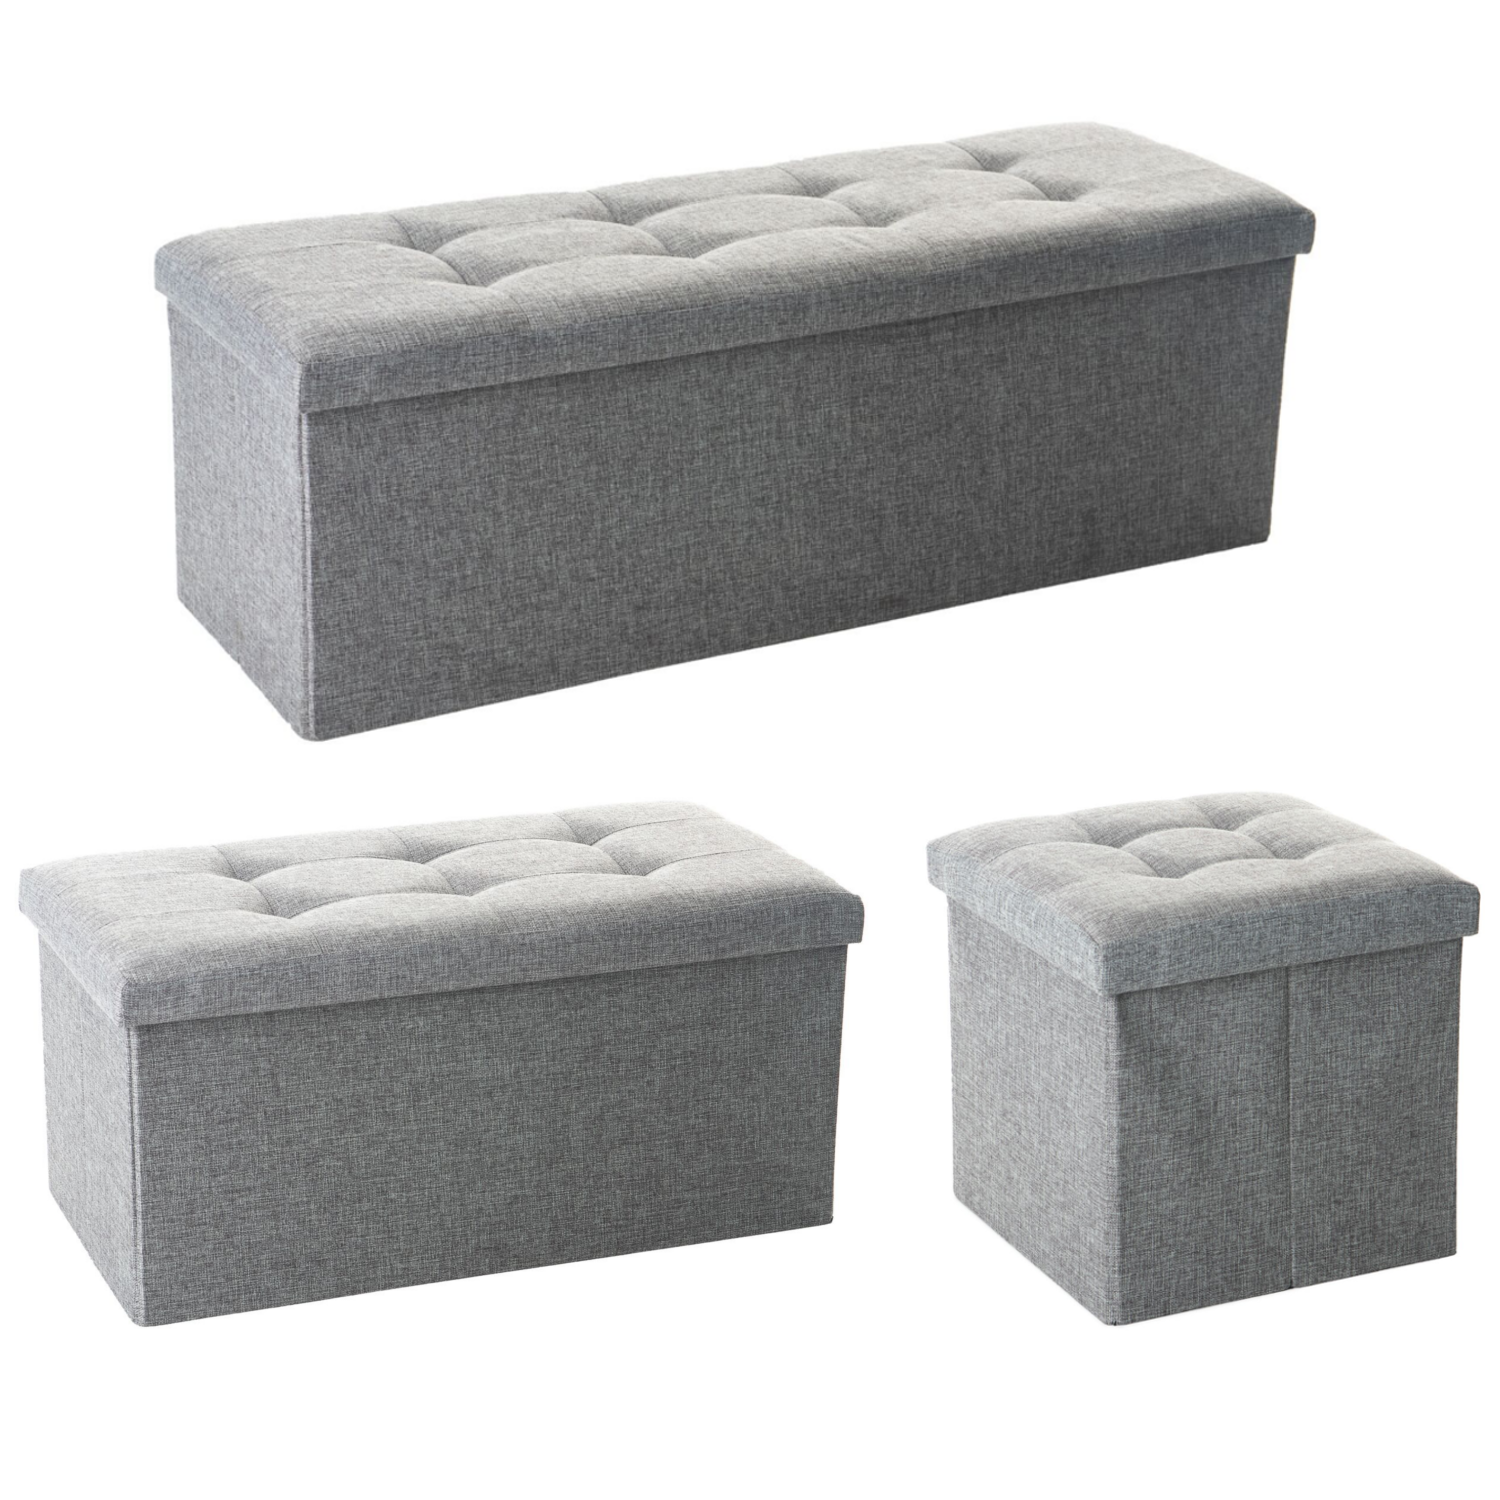 grey toy boxes